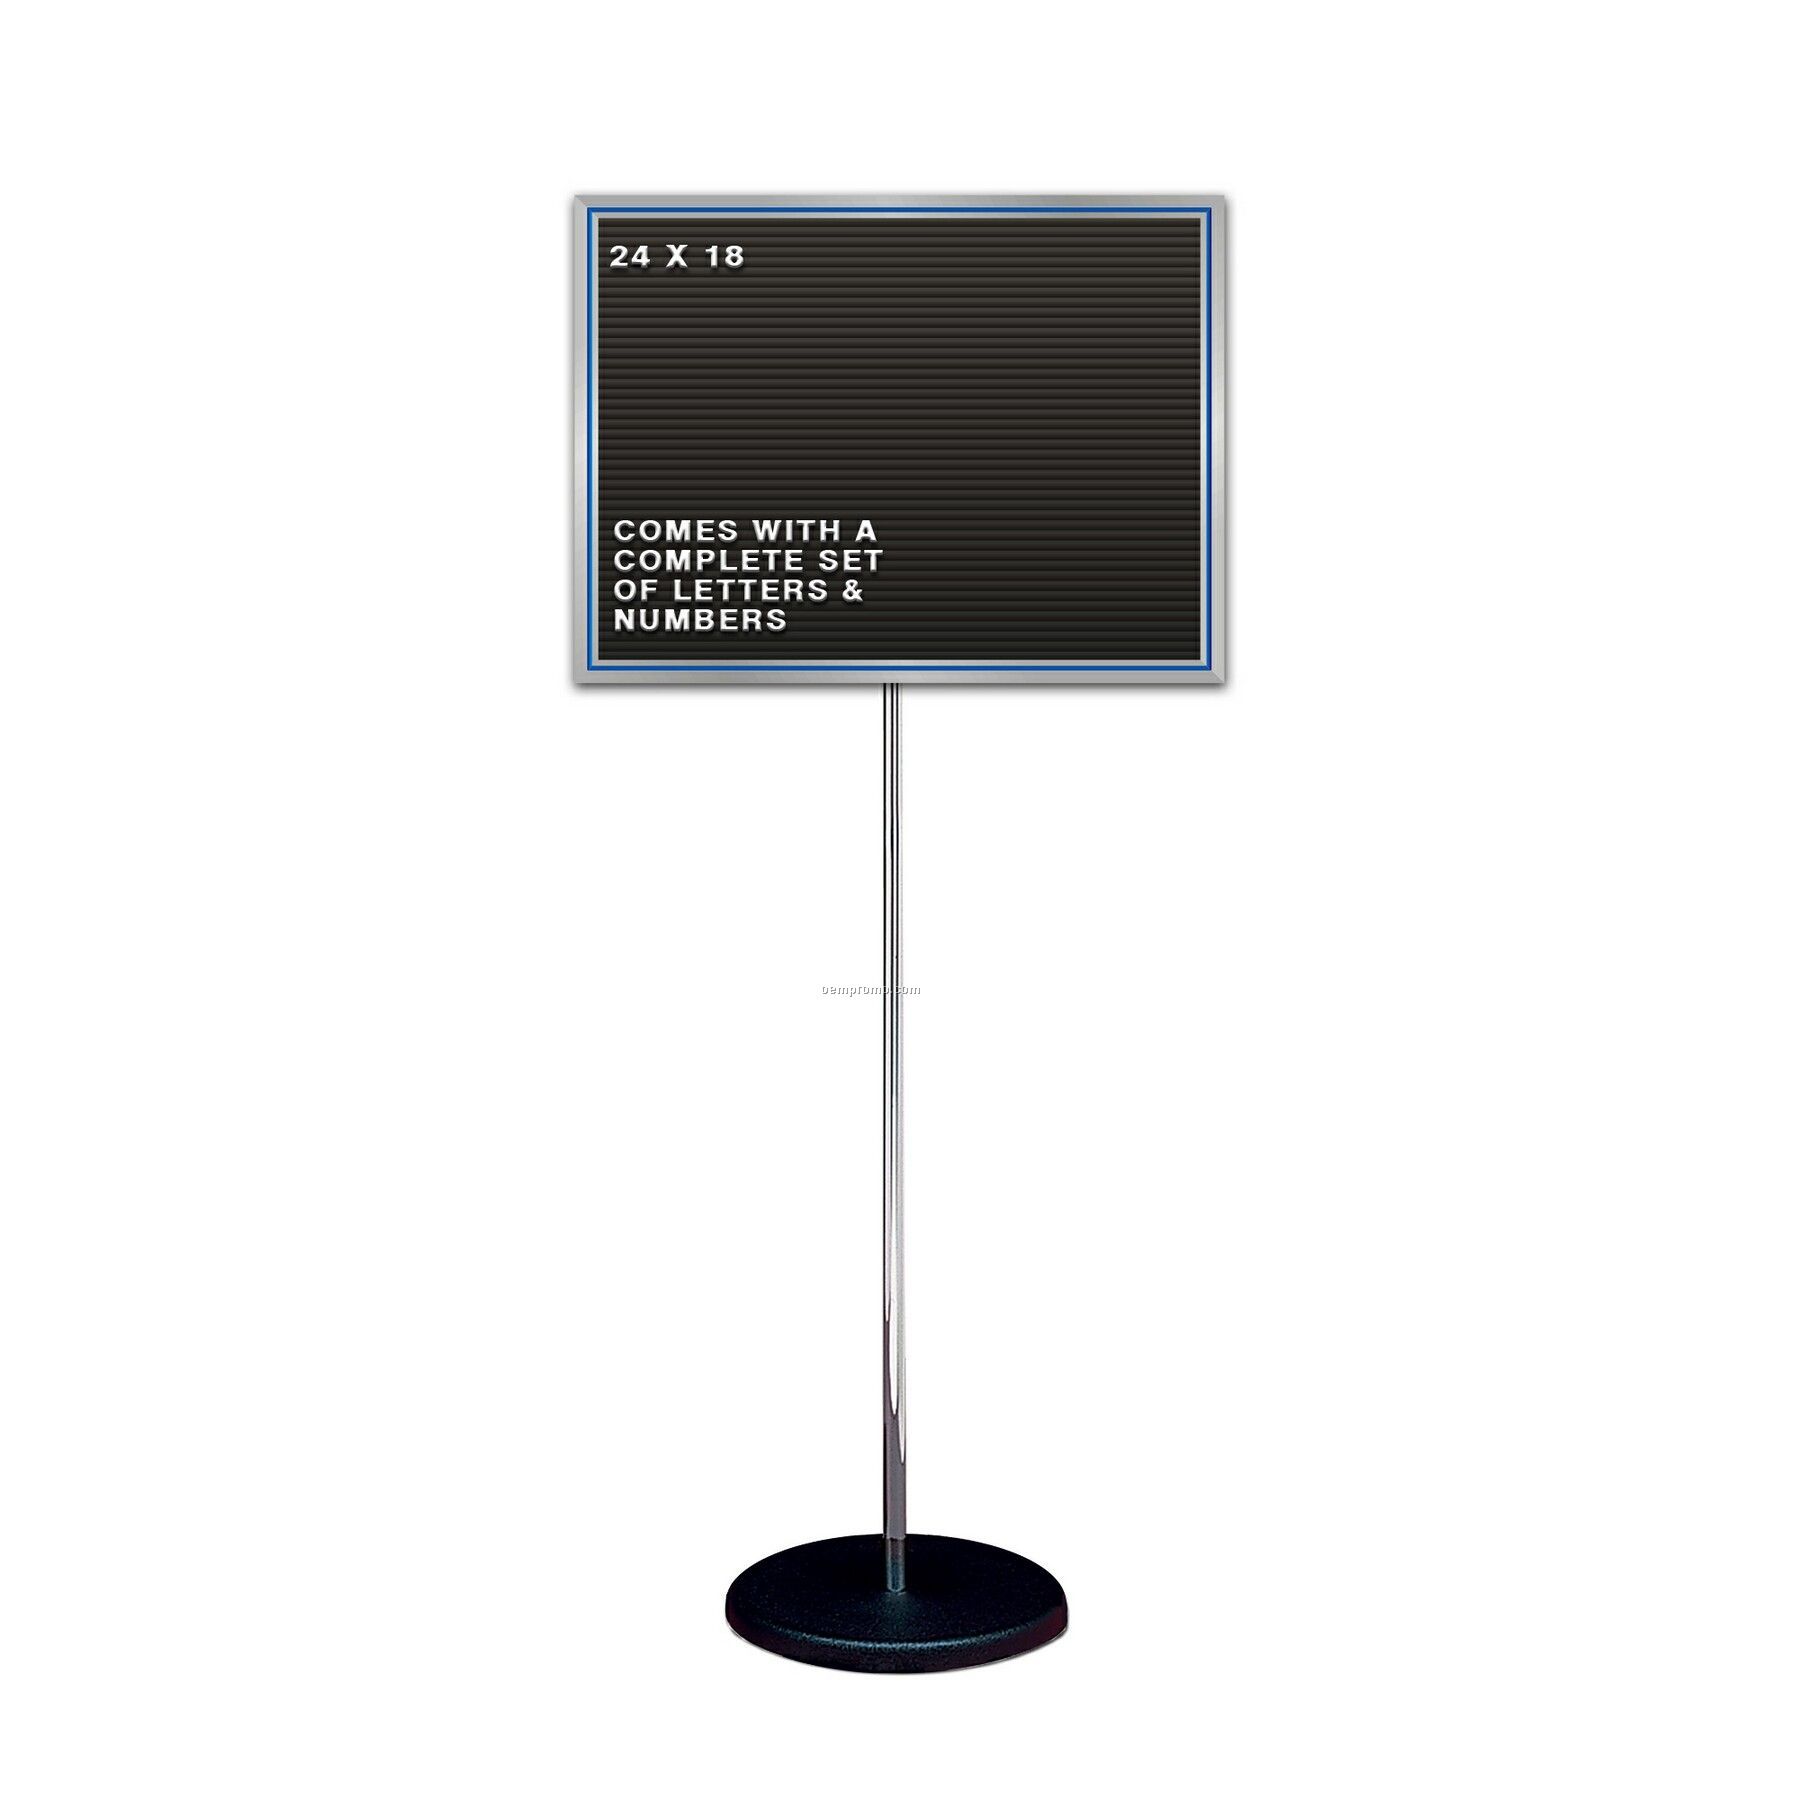 Free Standing Changeable Letter Board W/ Chrome Pole Stand (25"X19")